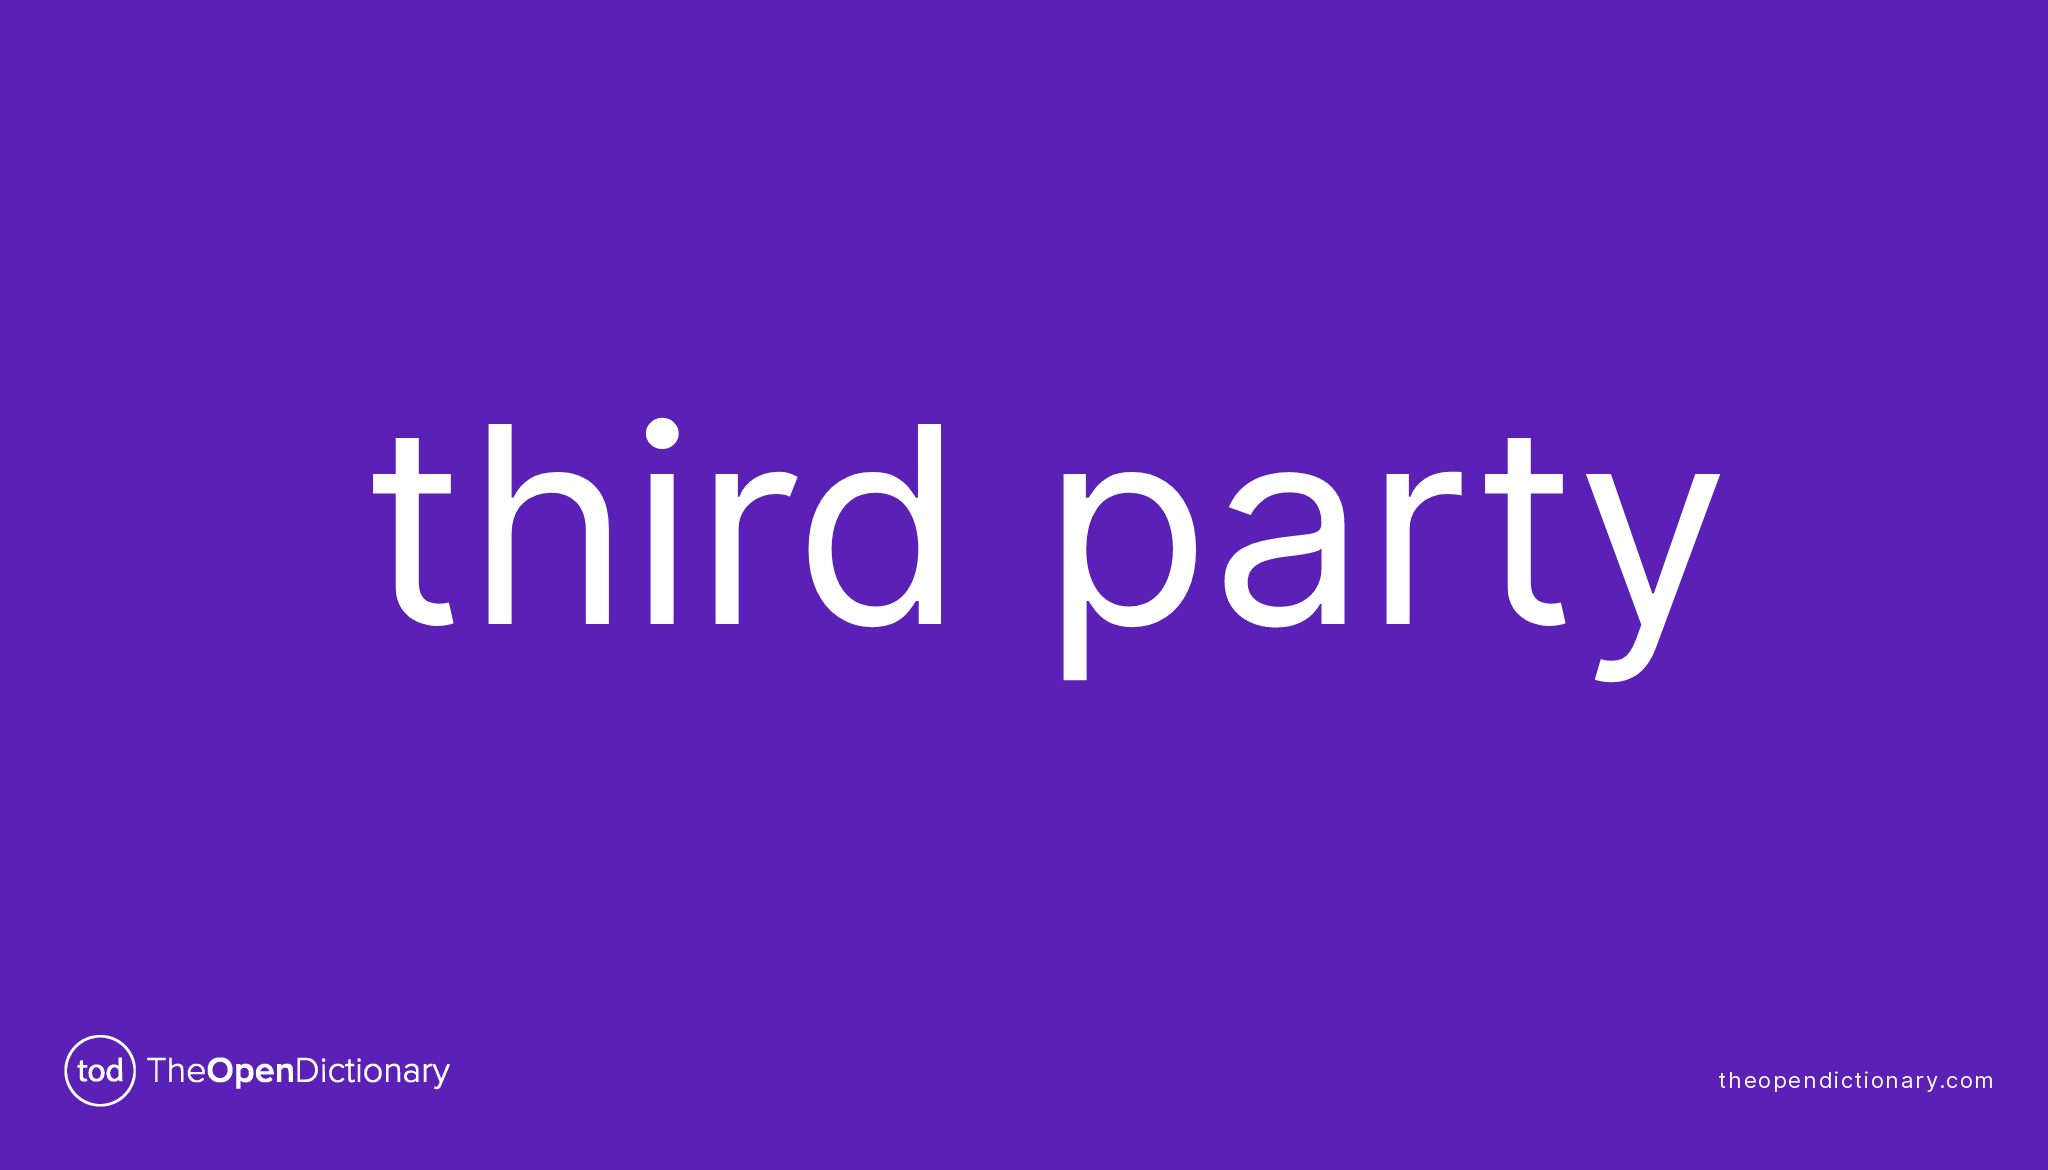 Third party | Meaning of Third party | Definition of Third party ...